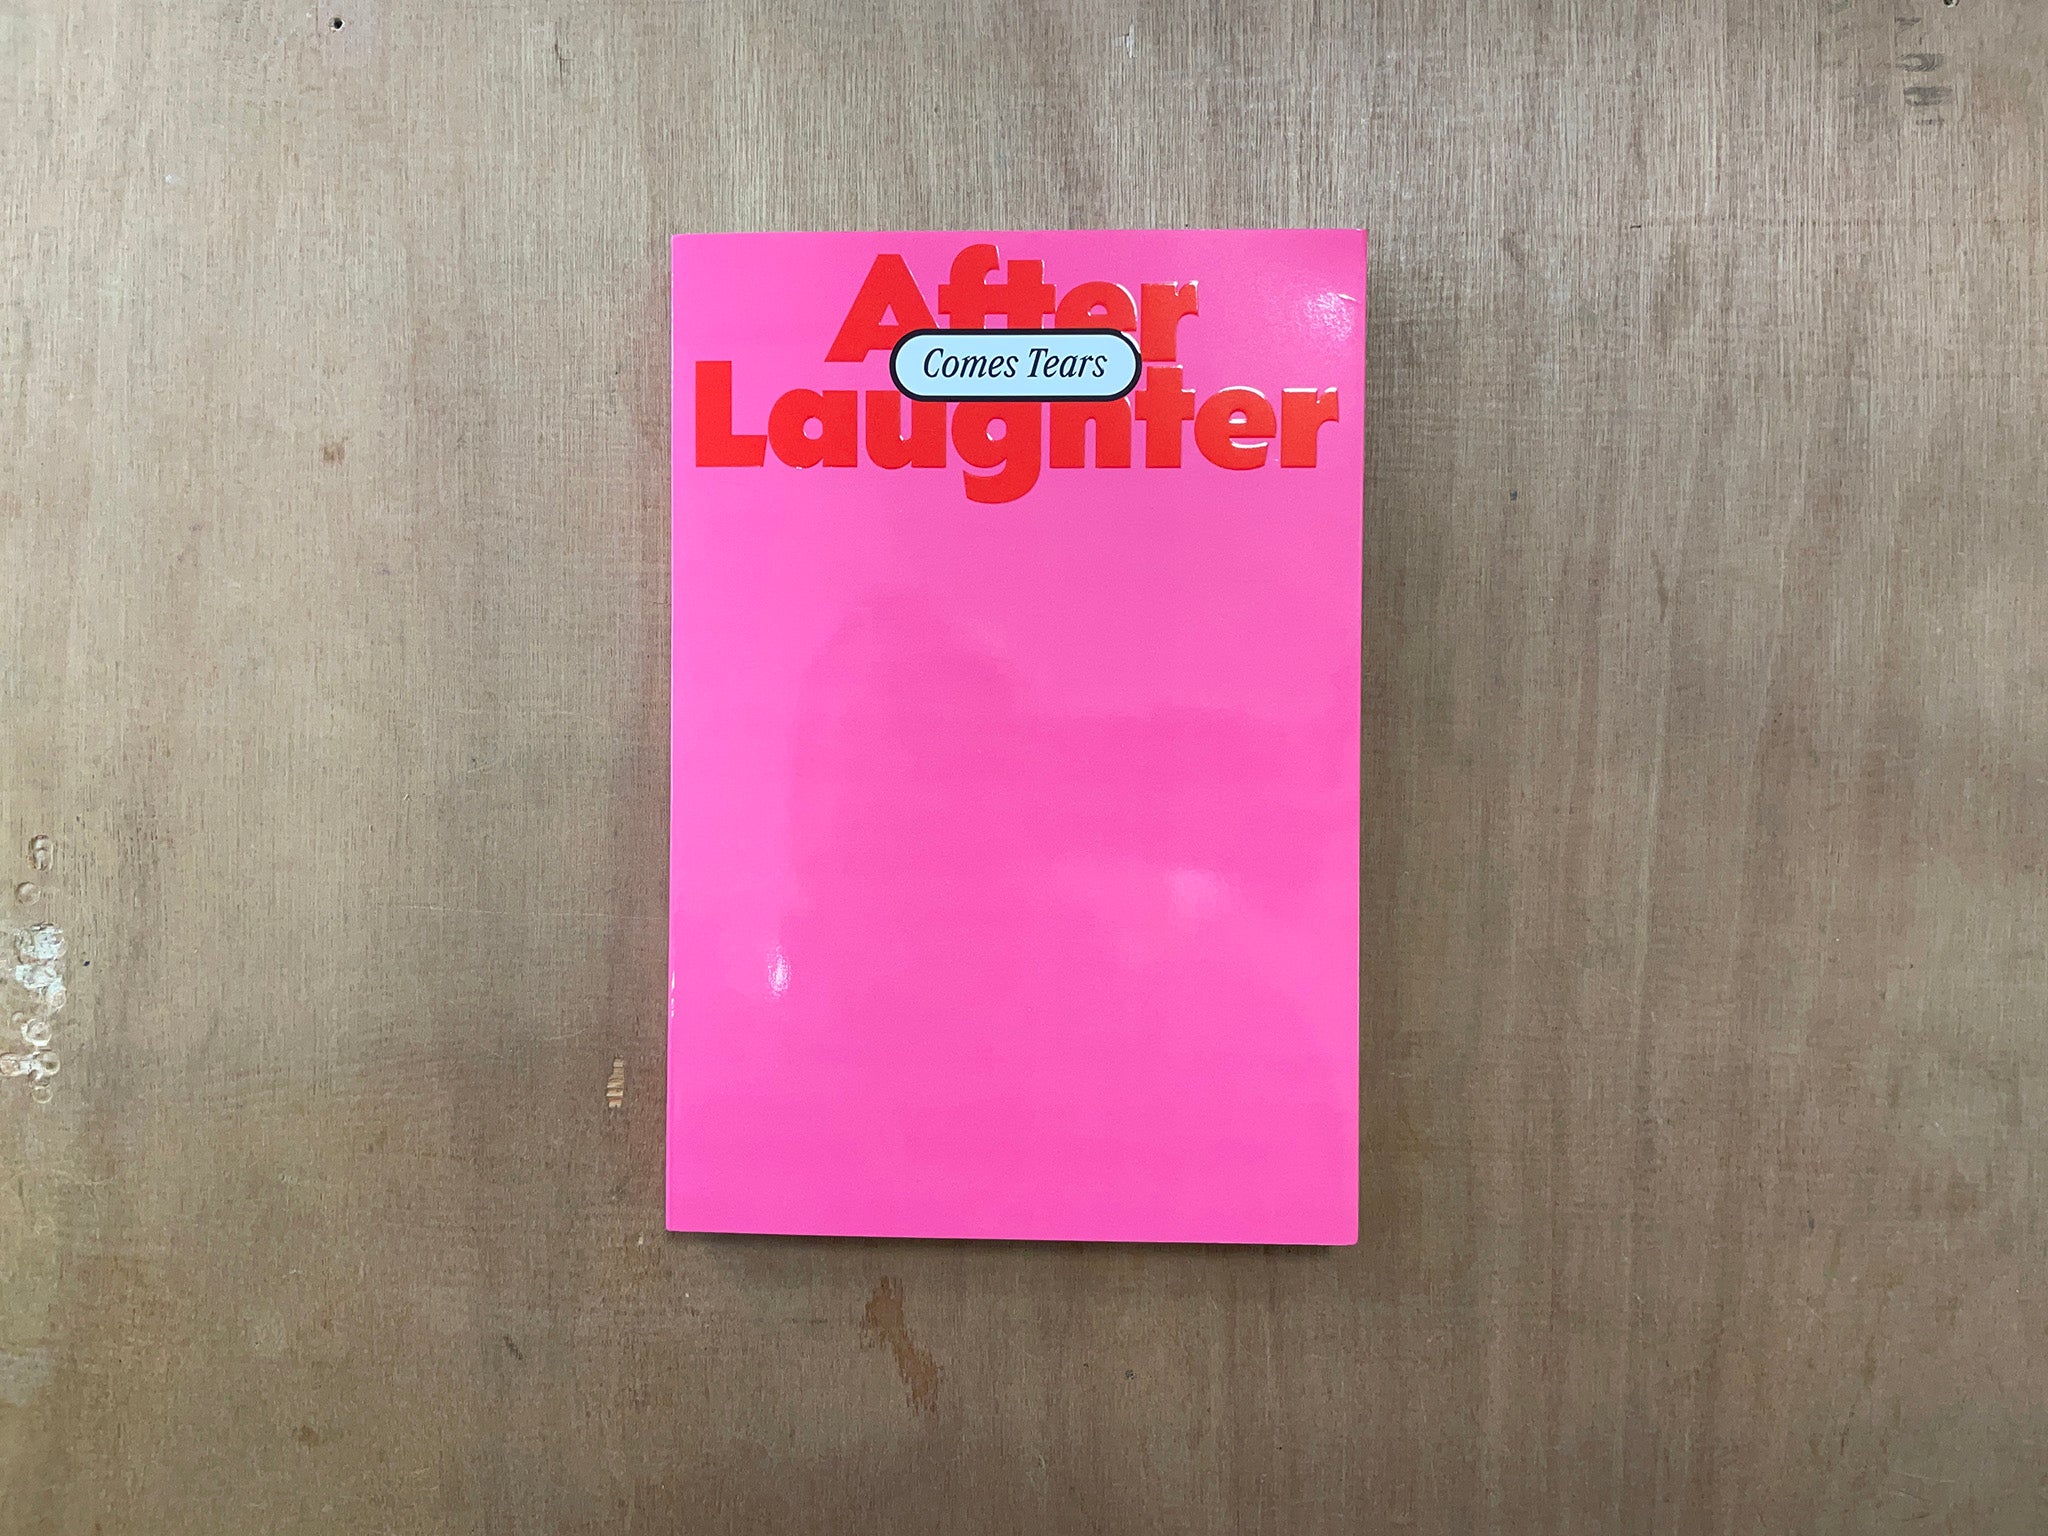 AFTER LAUGHTER COMES TEARS Ed. by Clarisse Fahrtmann, Clementine Proby, Joel Valabrega